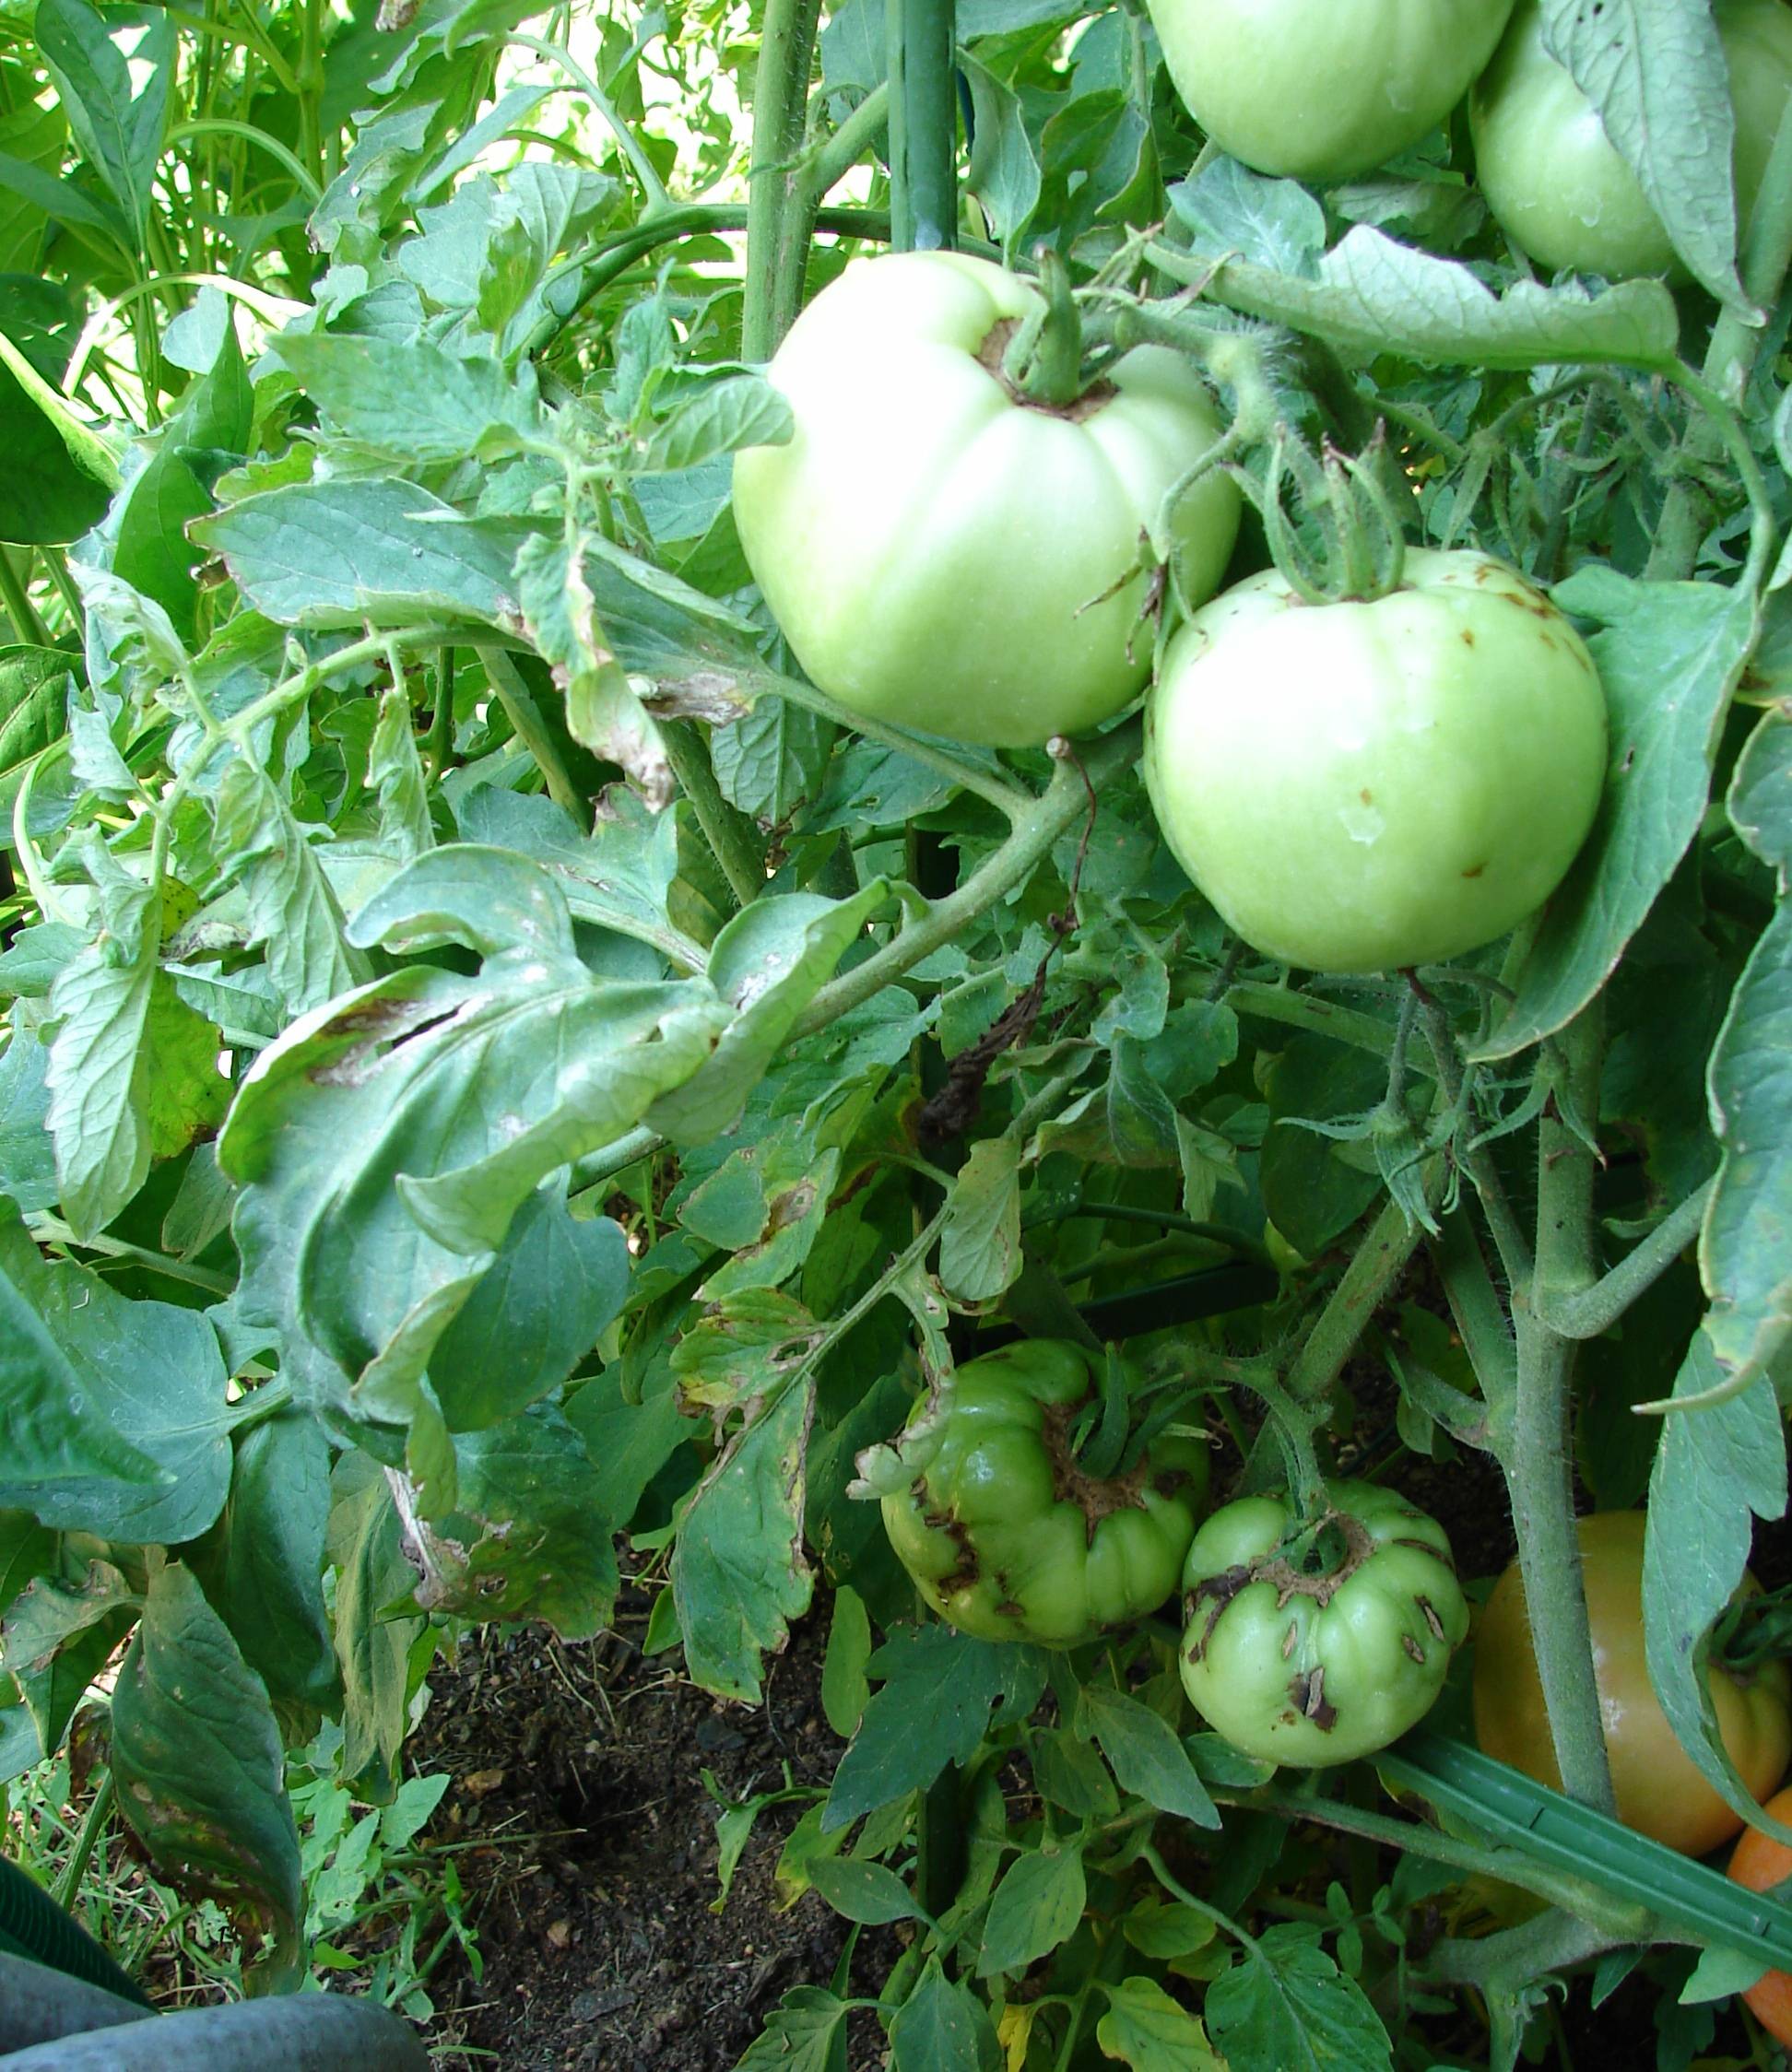 tomato spotted wilt virus 2 don't know source